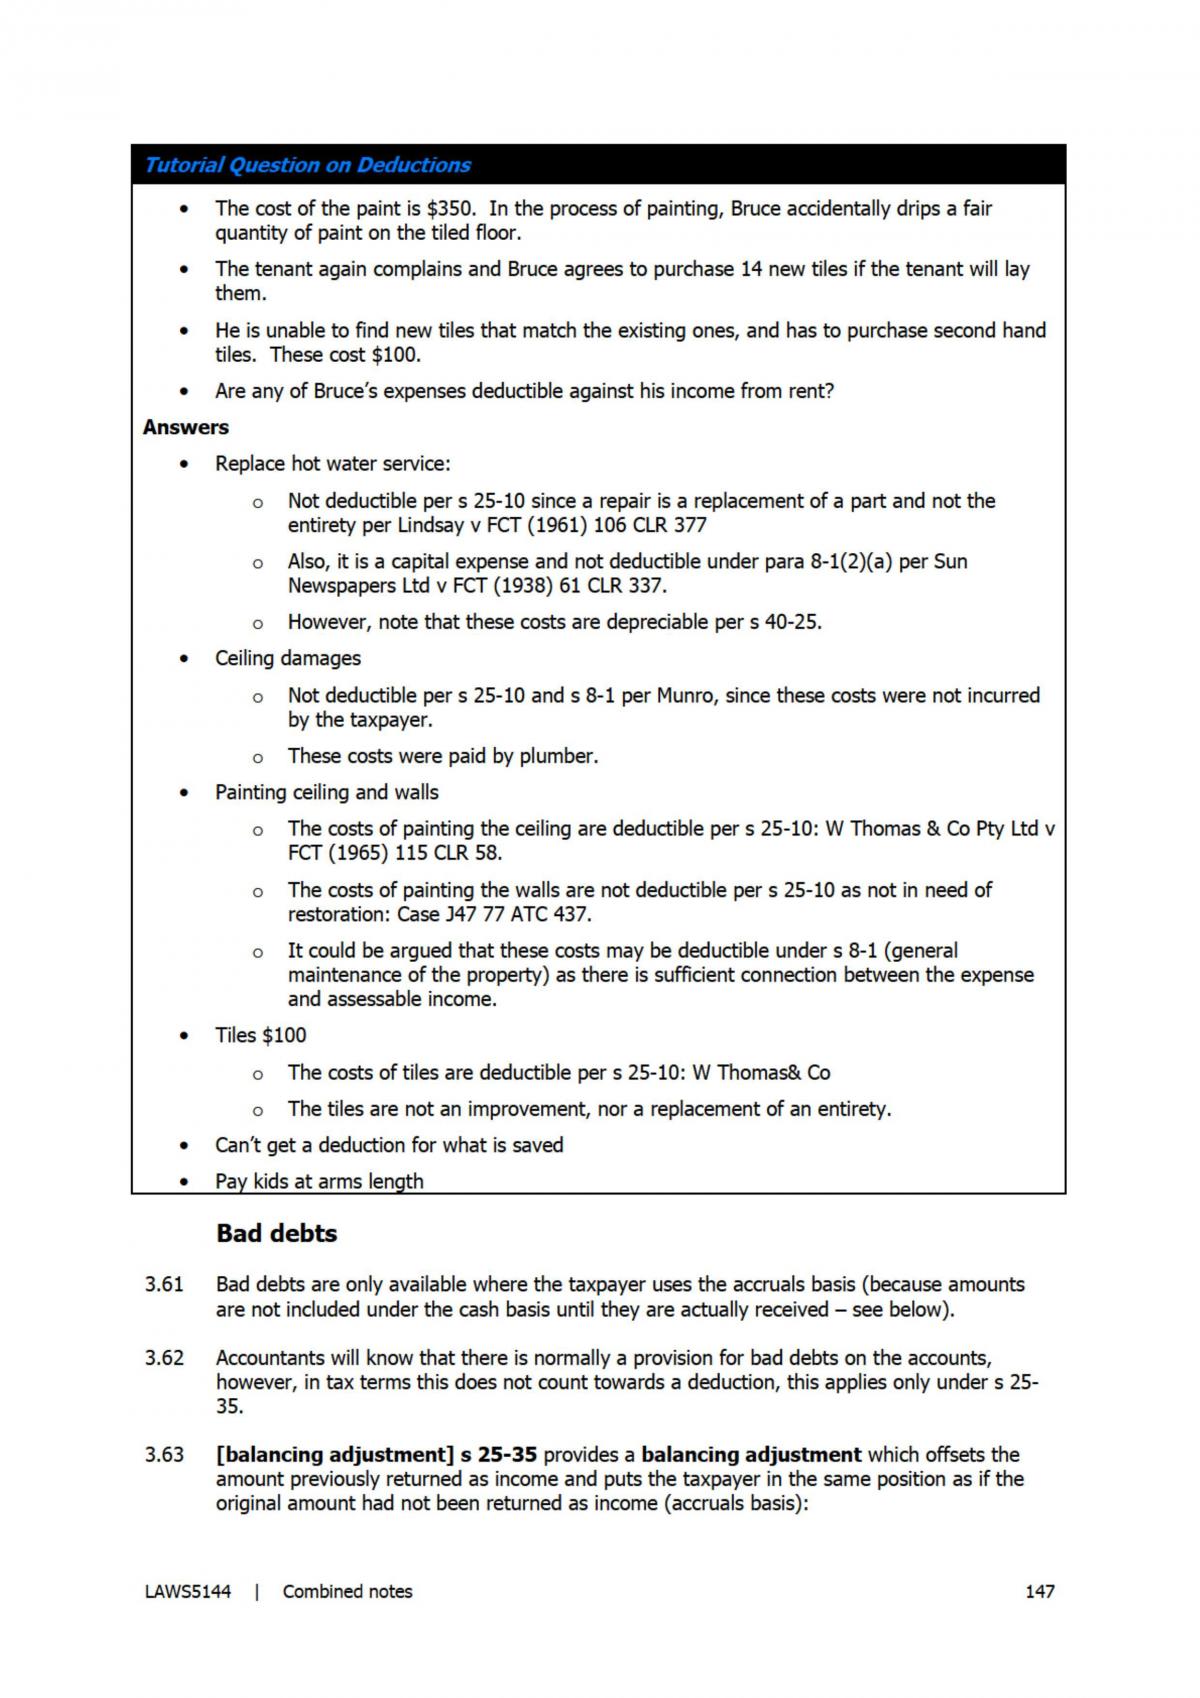 Final Exam Notes - Taxation Law - Page 147